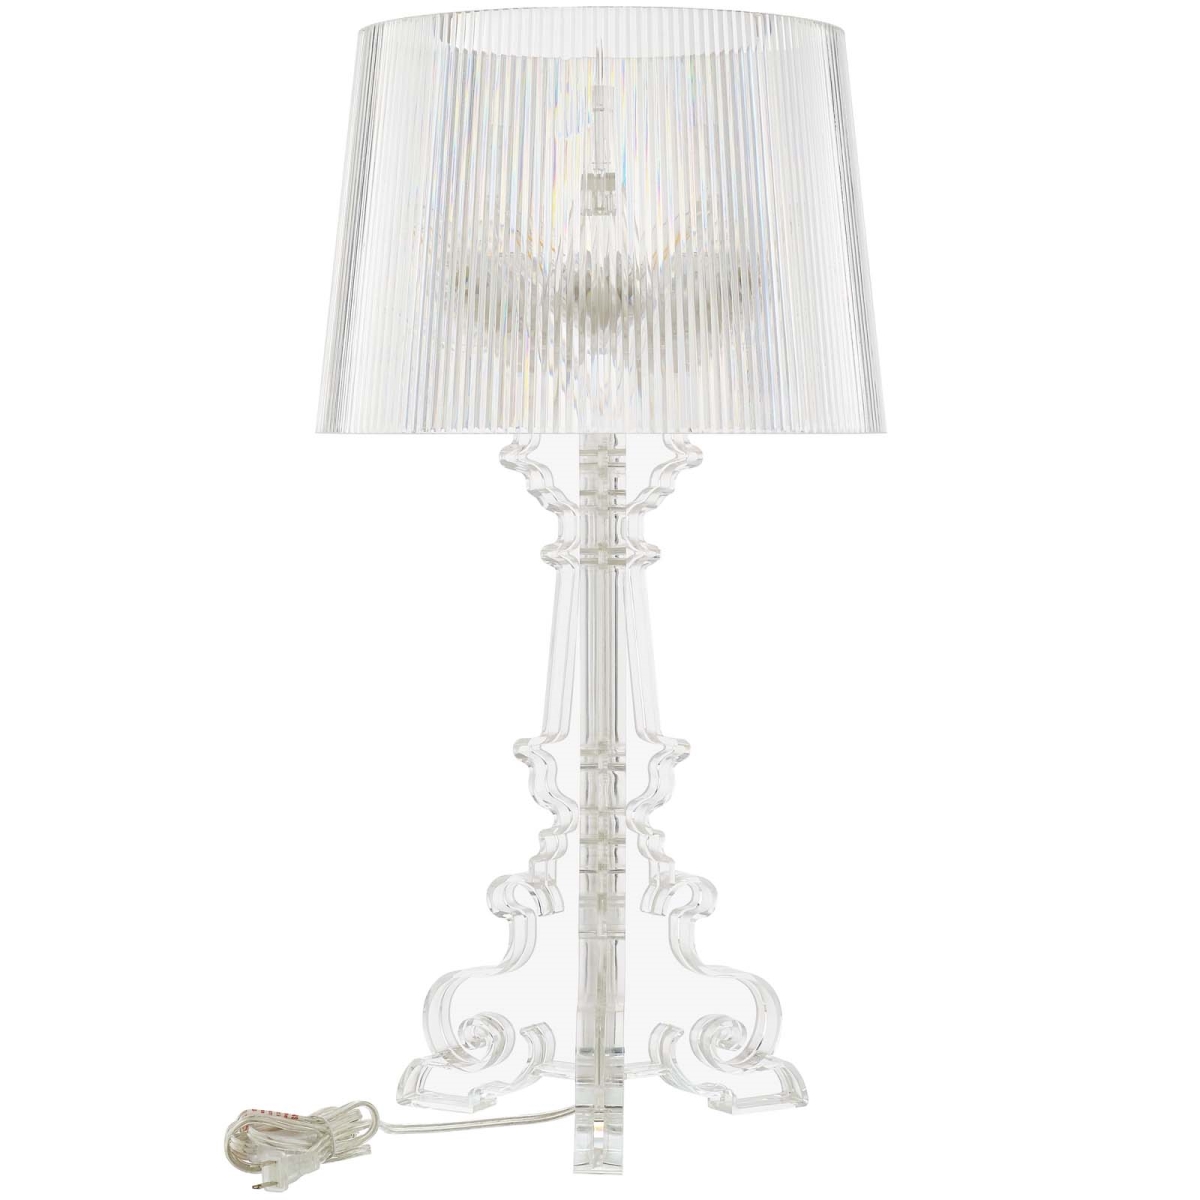 Eei-2908-clr 15.5 X 31.5 X 31.5 In. French Grande Table Lamp - Clear